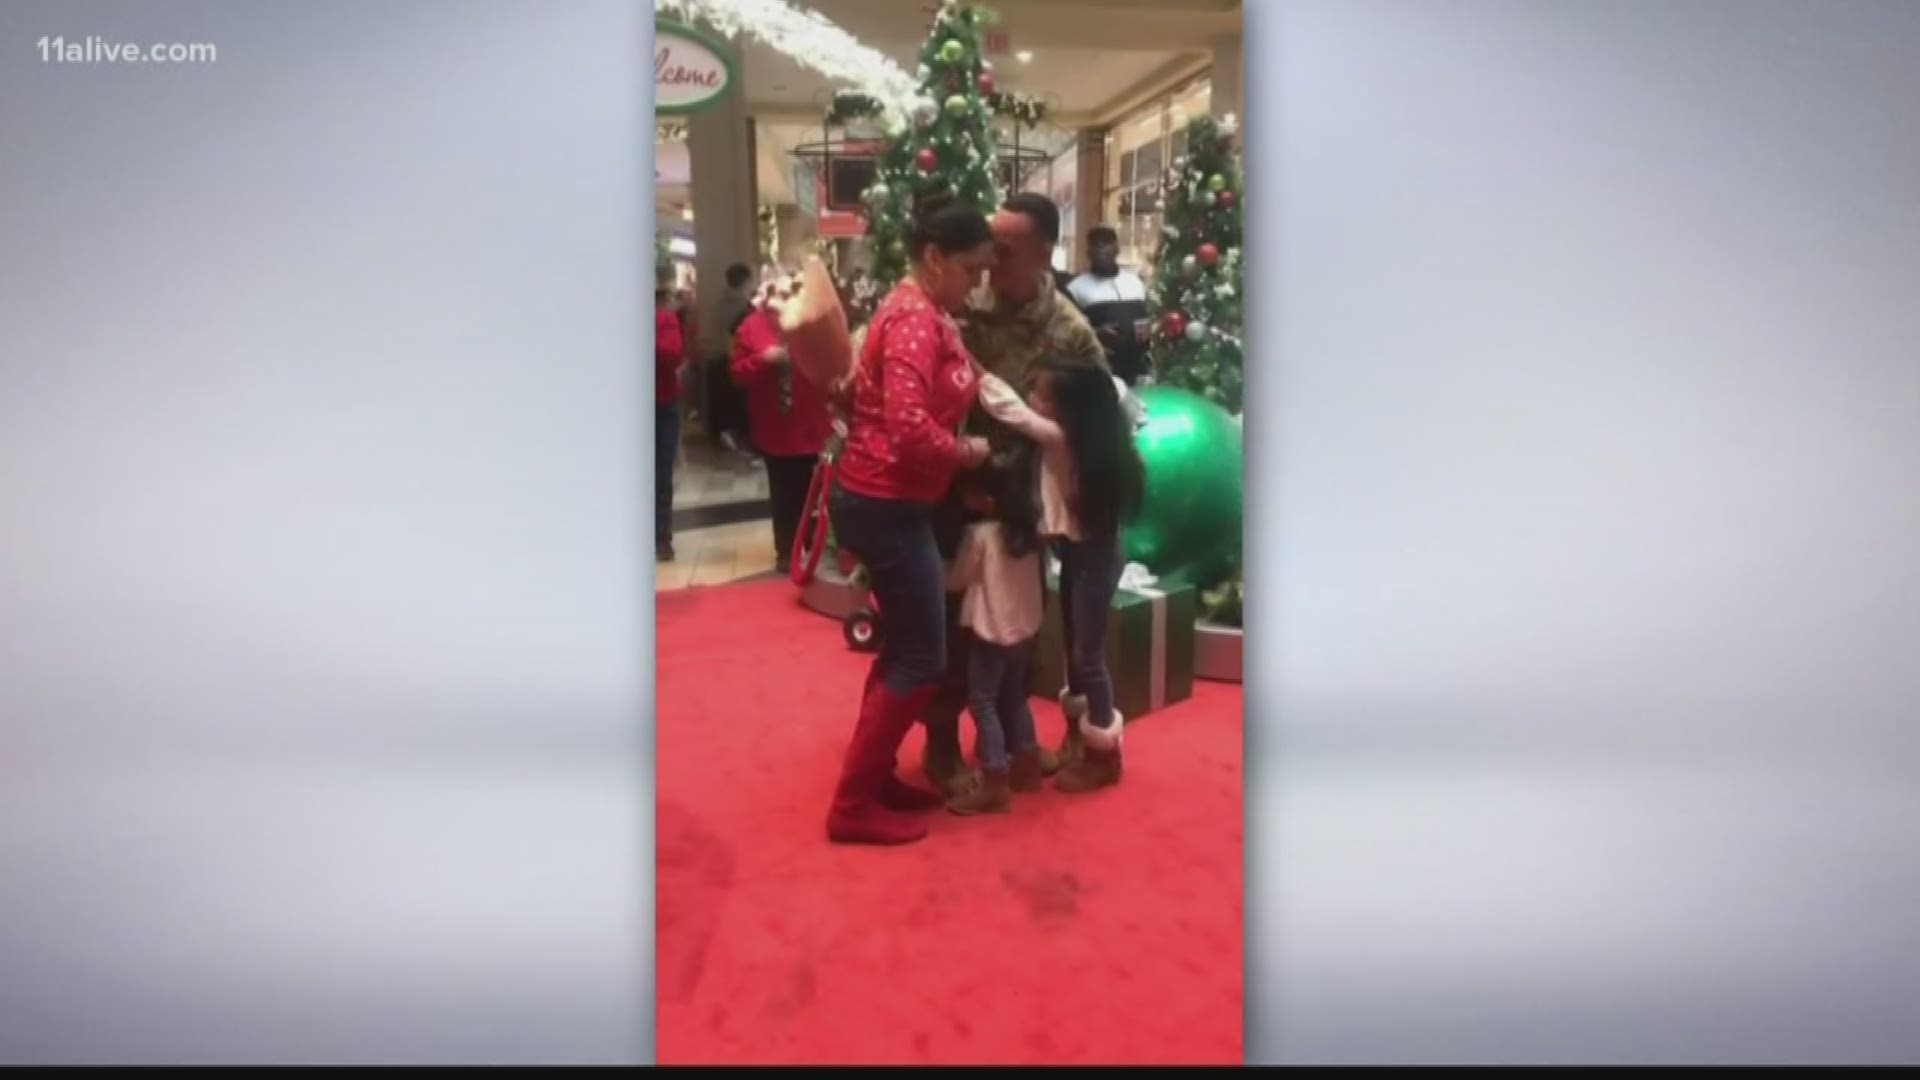 Sgt. Antonio Coriano was serving in Afghanistan on his third tour of duty. With Santa's help he surprised his family just in time for Christmas.